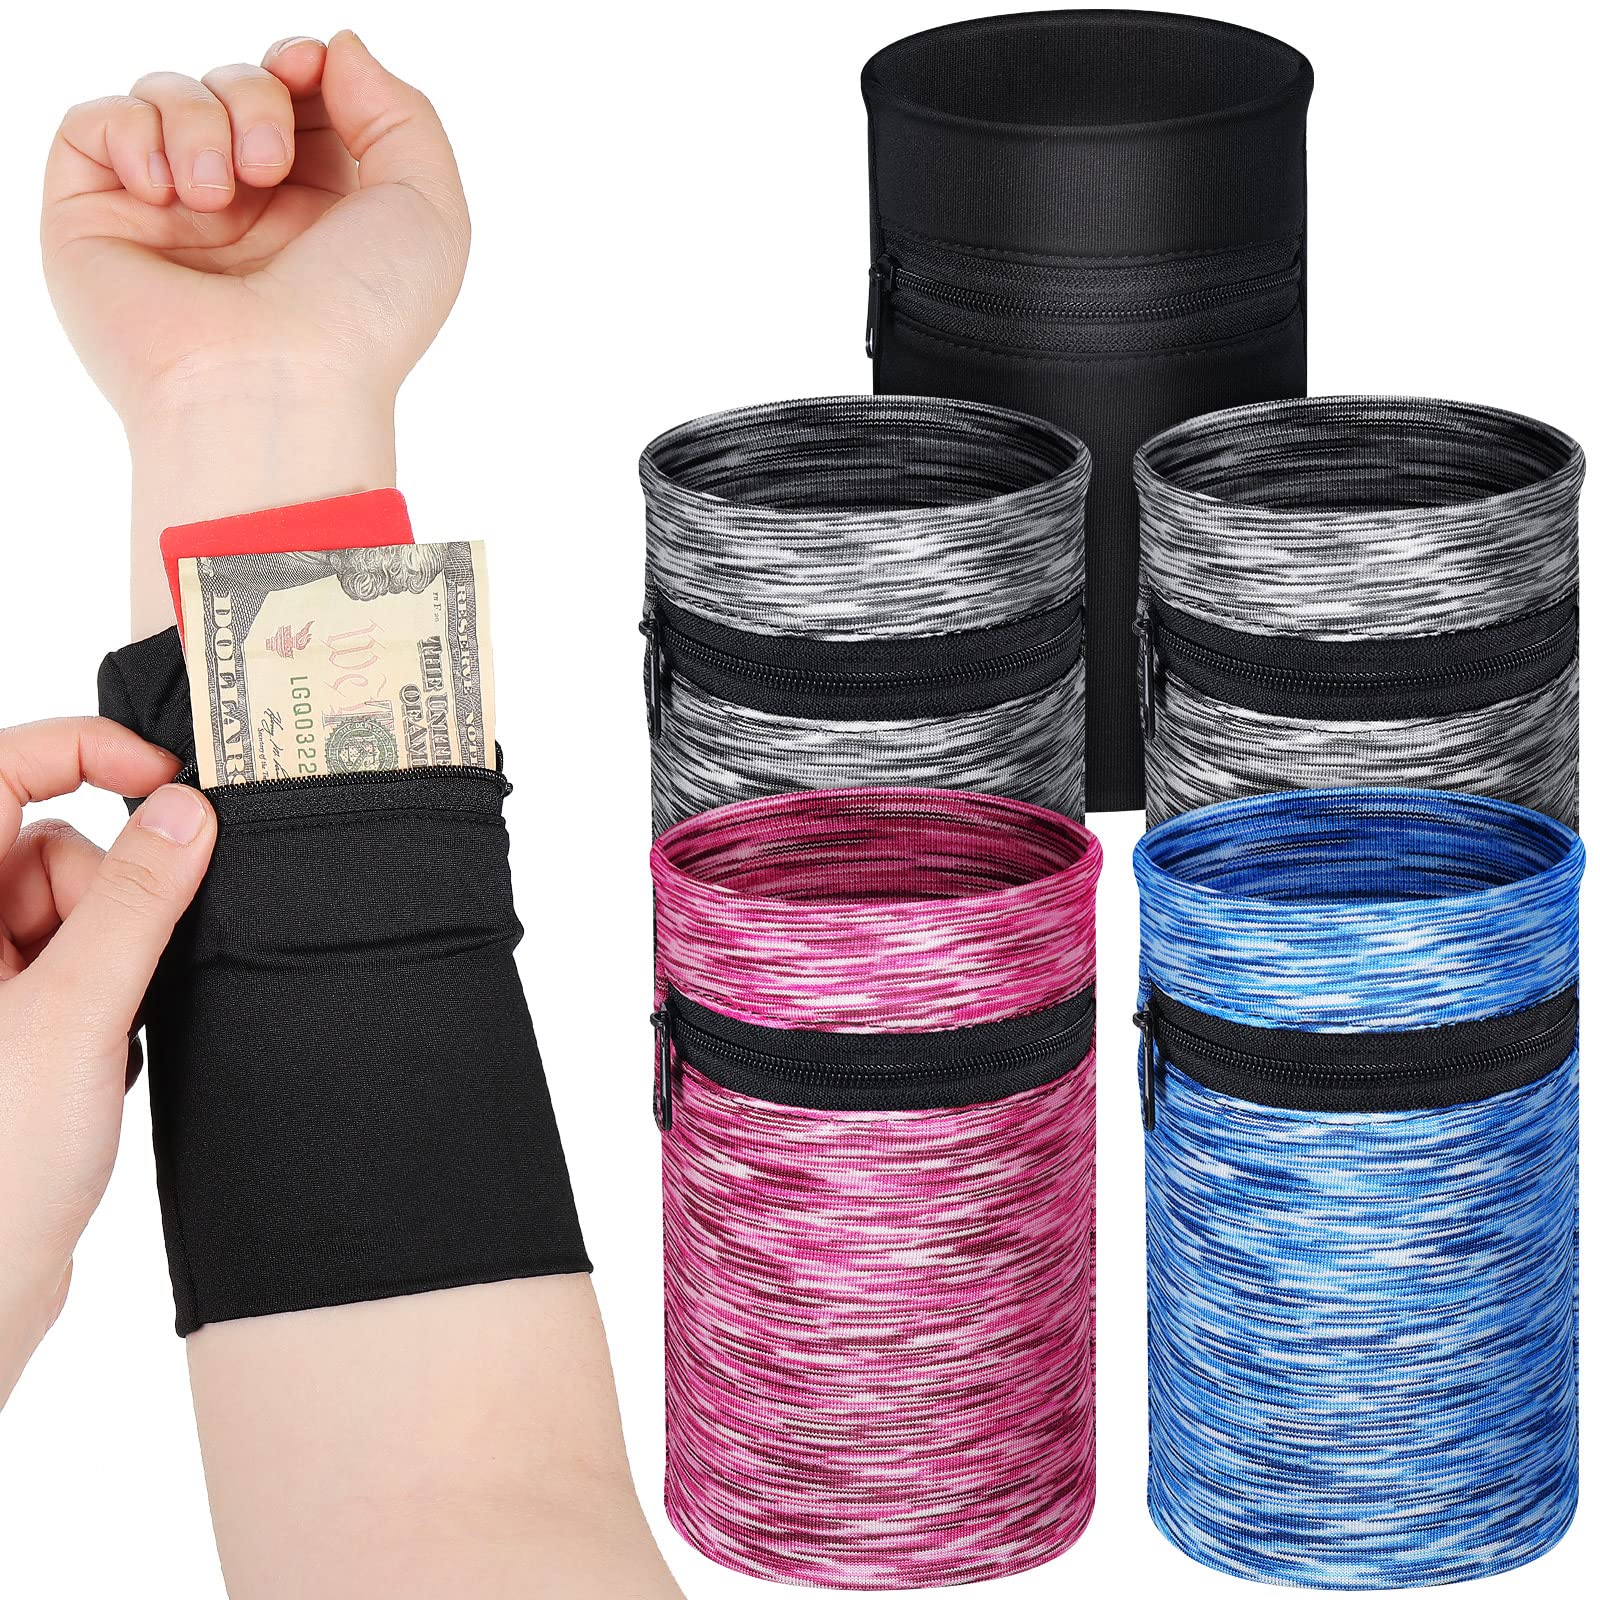 5 Pieces Wrist Wallet Phone Armband Sleeve Running Wallet Wristband Wallets for Women Men Sports Wrist Pouch with Zipper for Phone Running Walking Hiking Jogging Travel Fishing